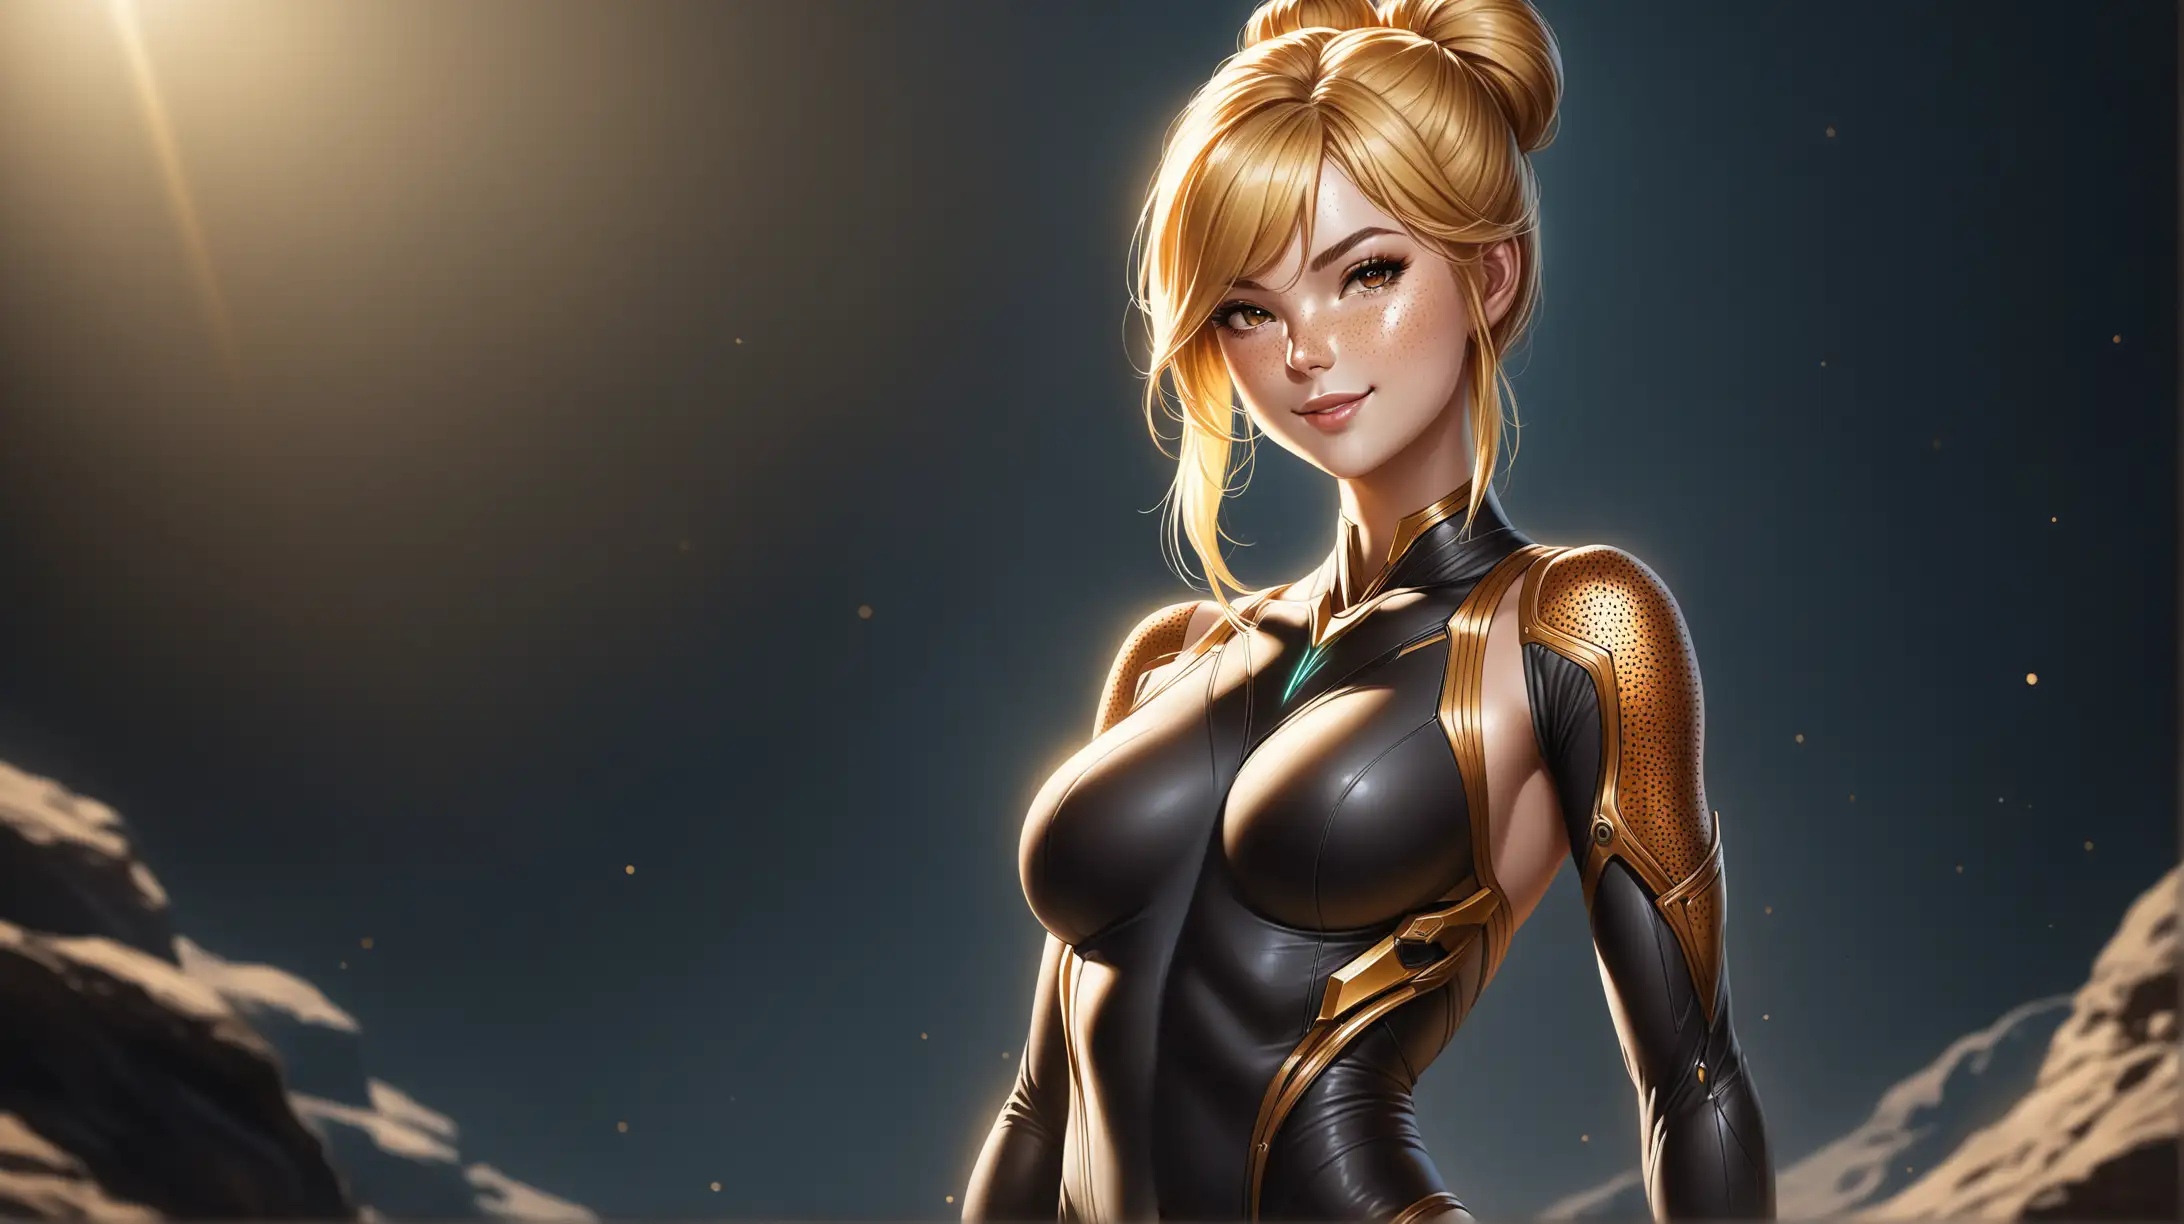 Draw a woman, long blonde hair in a bun, gold eyes, freckles, perky body, high quality, realistic, long shot, outdoors, dim lighting, outfit inspired from Warframe, seductive pose, smiling toward the viewer